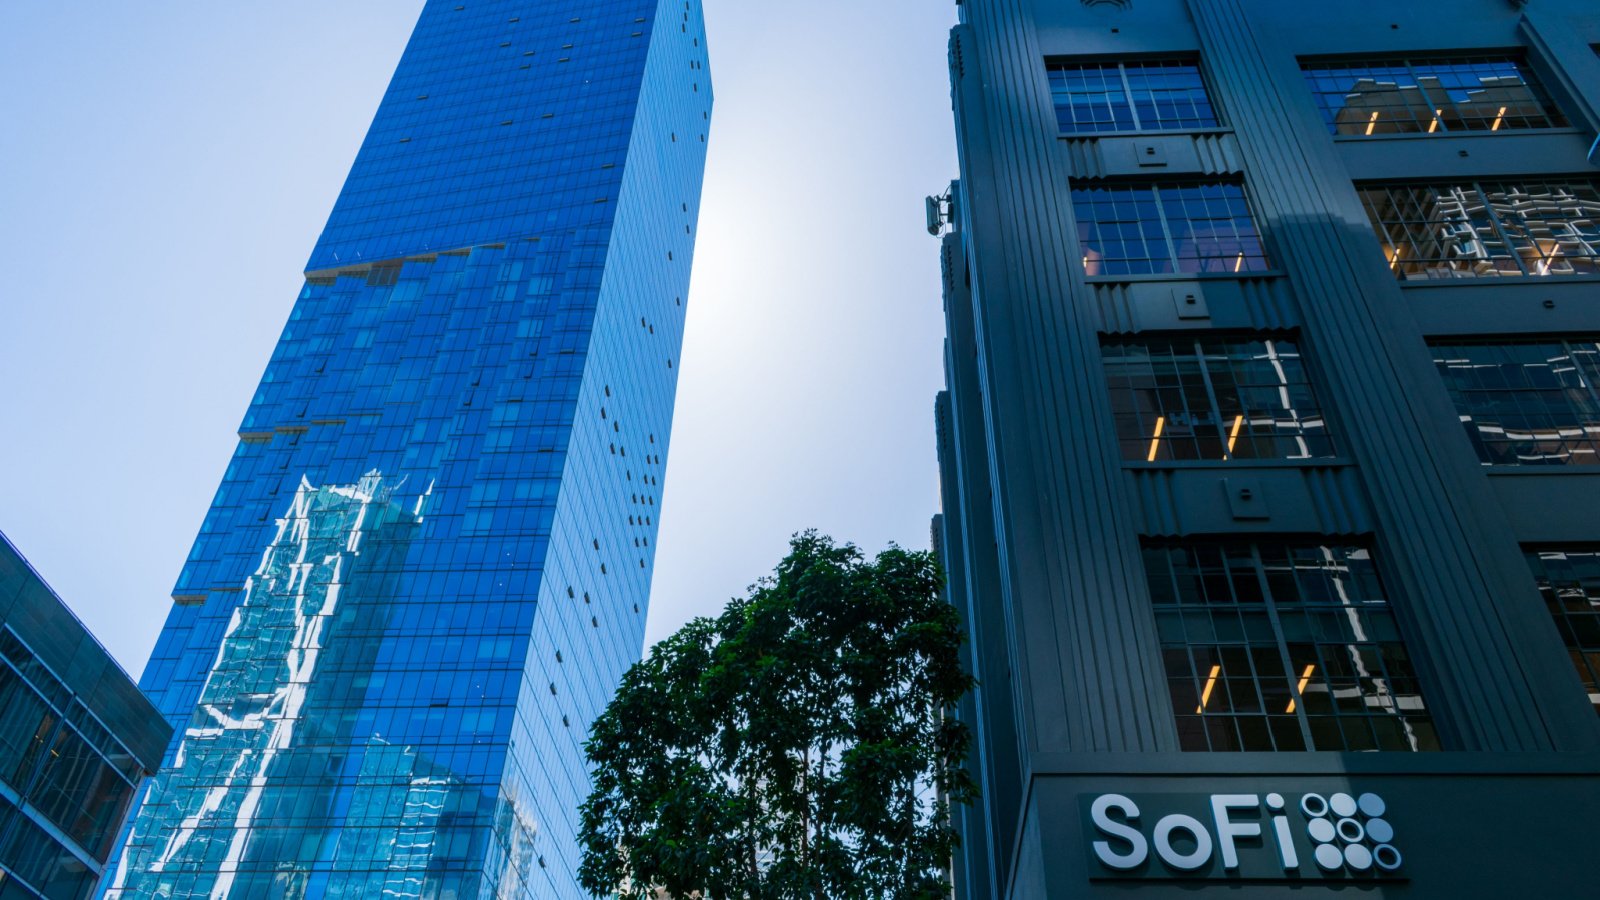 SoFi Technologies corporate building shown next to neighboring skyscraper during the daytime